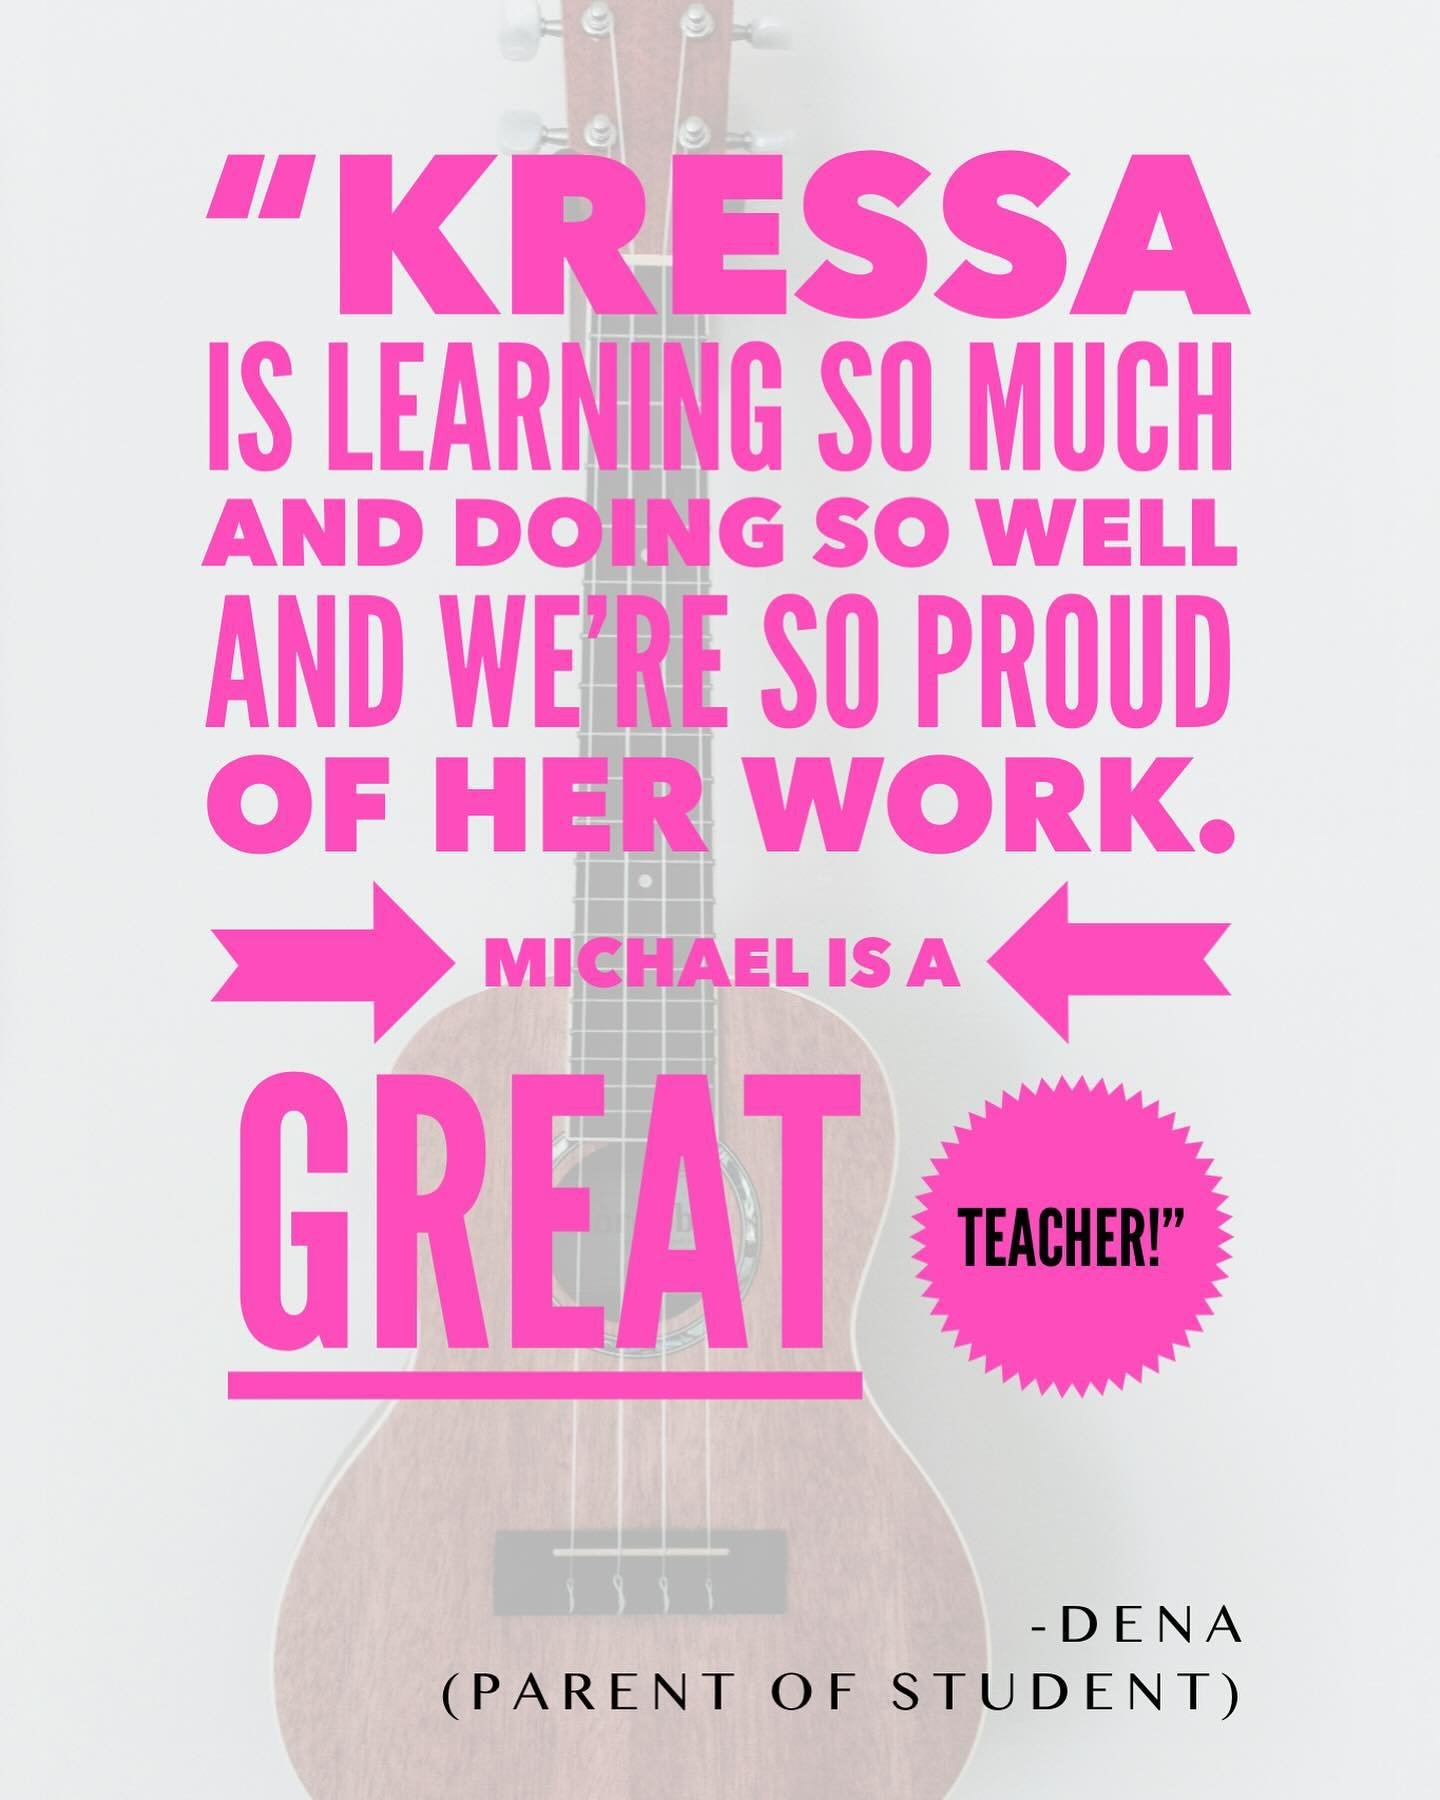 We love happy students and parents! And a big shoutout to our amazing teachers!!!❤️🎸❤️🎸❤️🎸
#happycustomer #happyparent #happystudent #musicteachersarecool #musicrocks #musiclessonsforkids #musiclessonsforadults #musiclessons #guitarlessons #herita